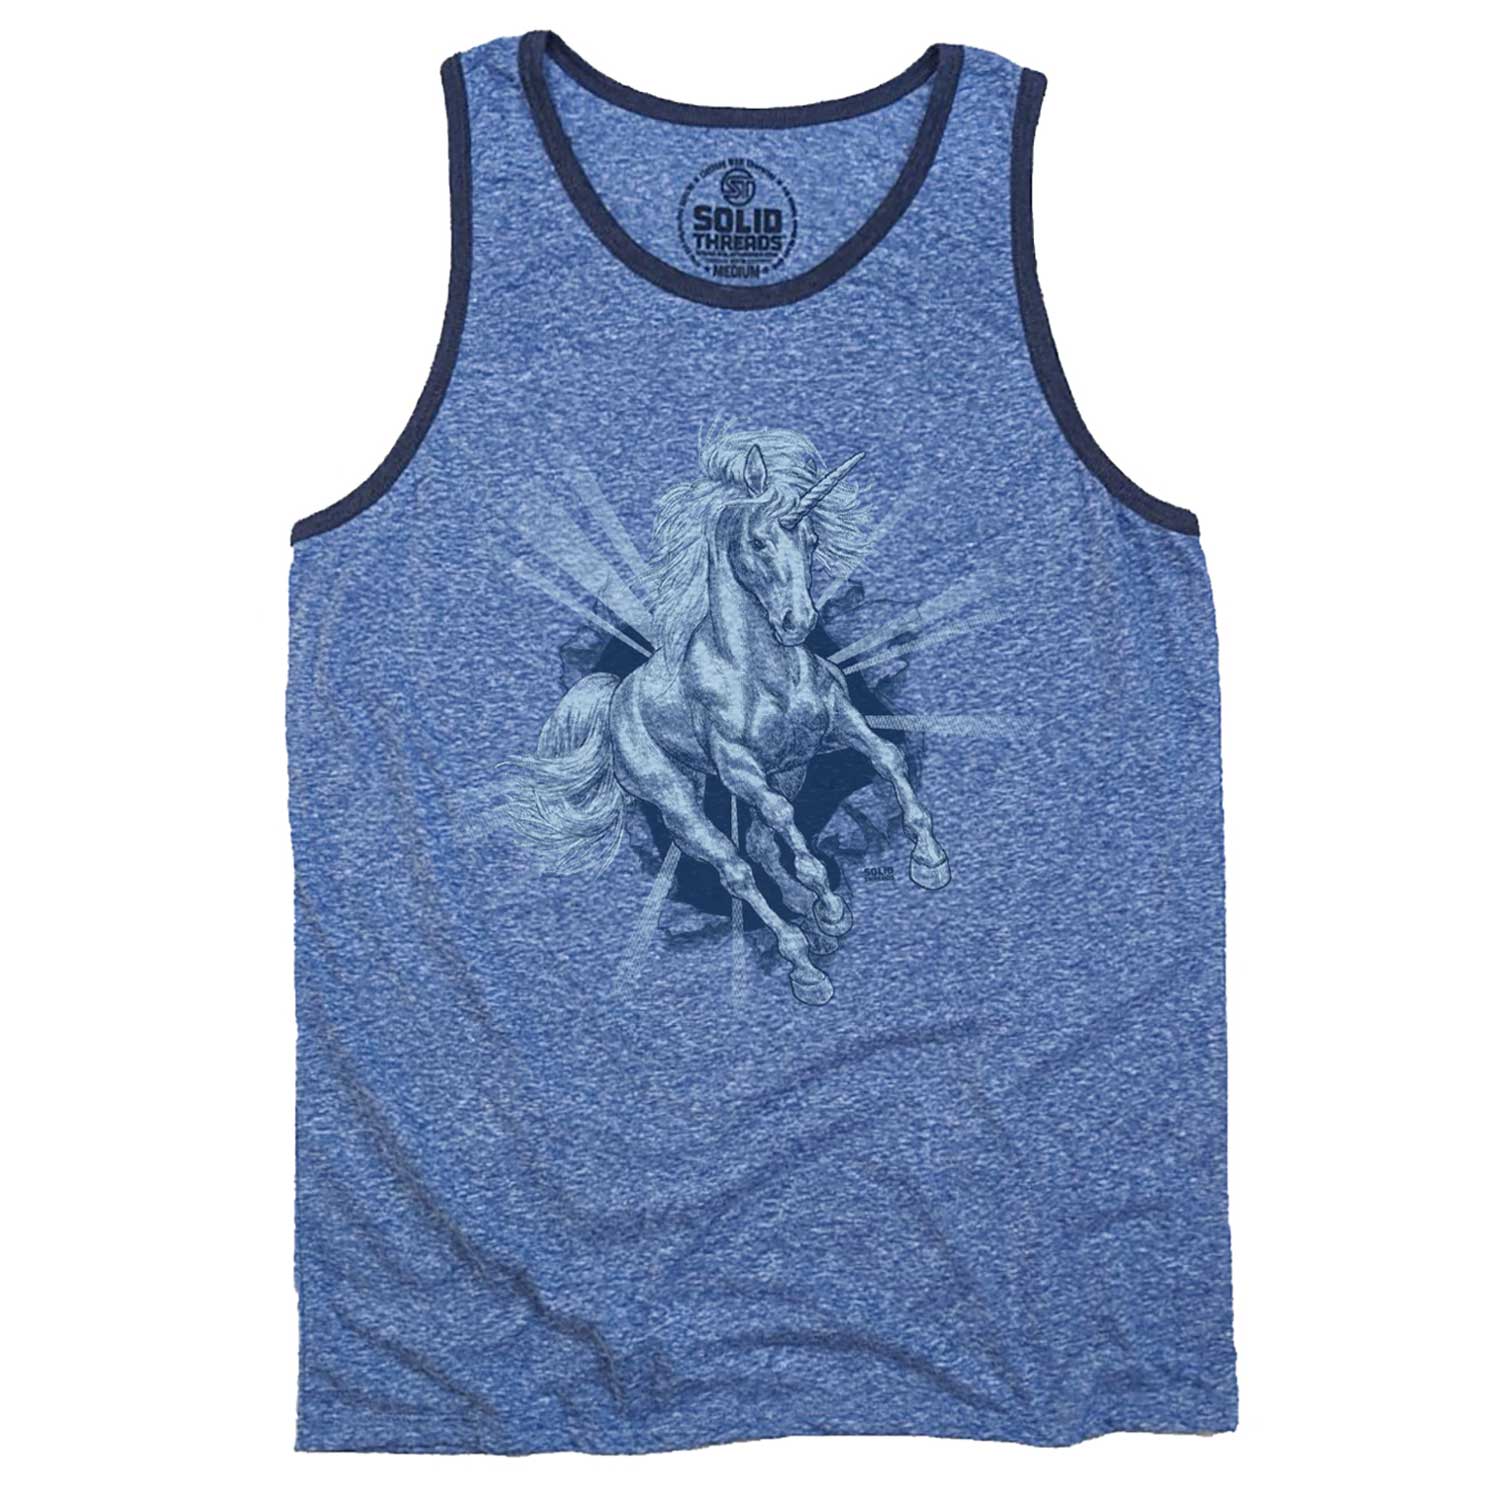 Men's Unicorn Chest Vintage Graphic Tank Top | Funny Mythical T-shirt | Solid Threads